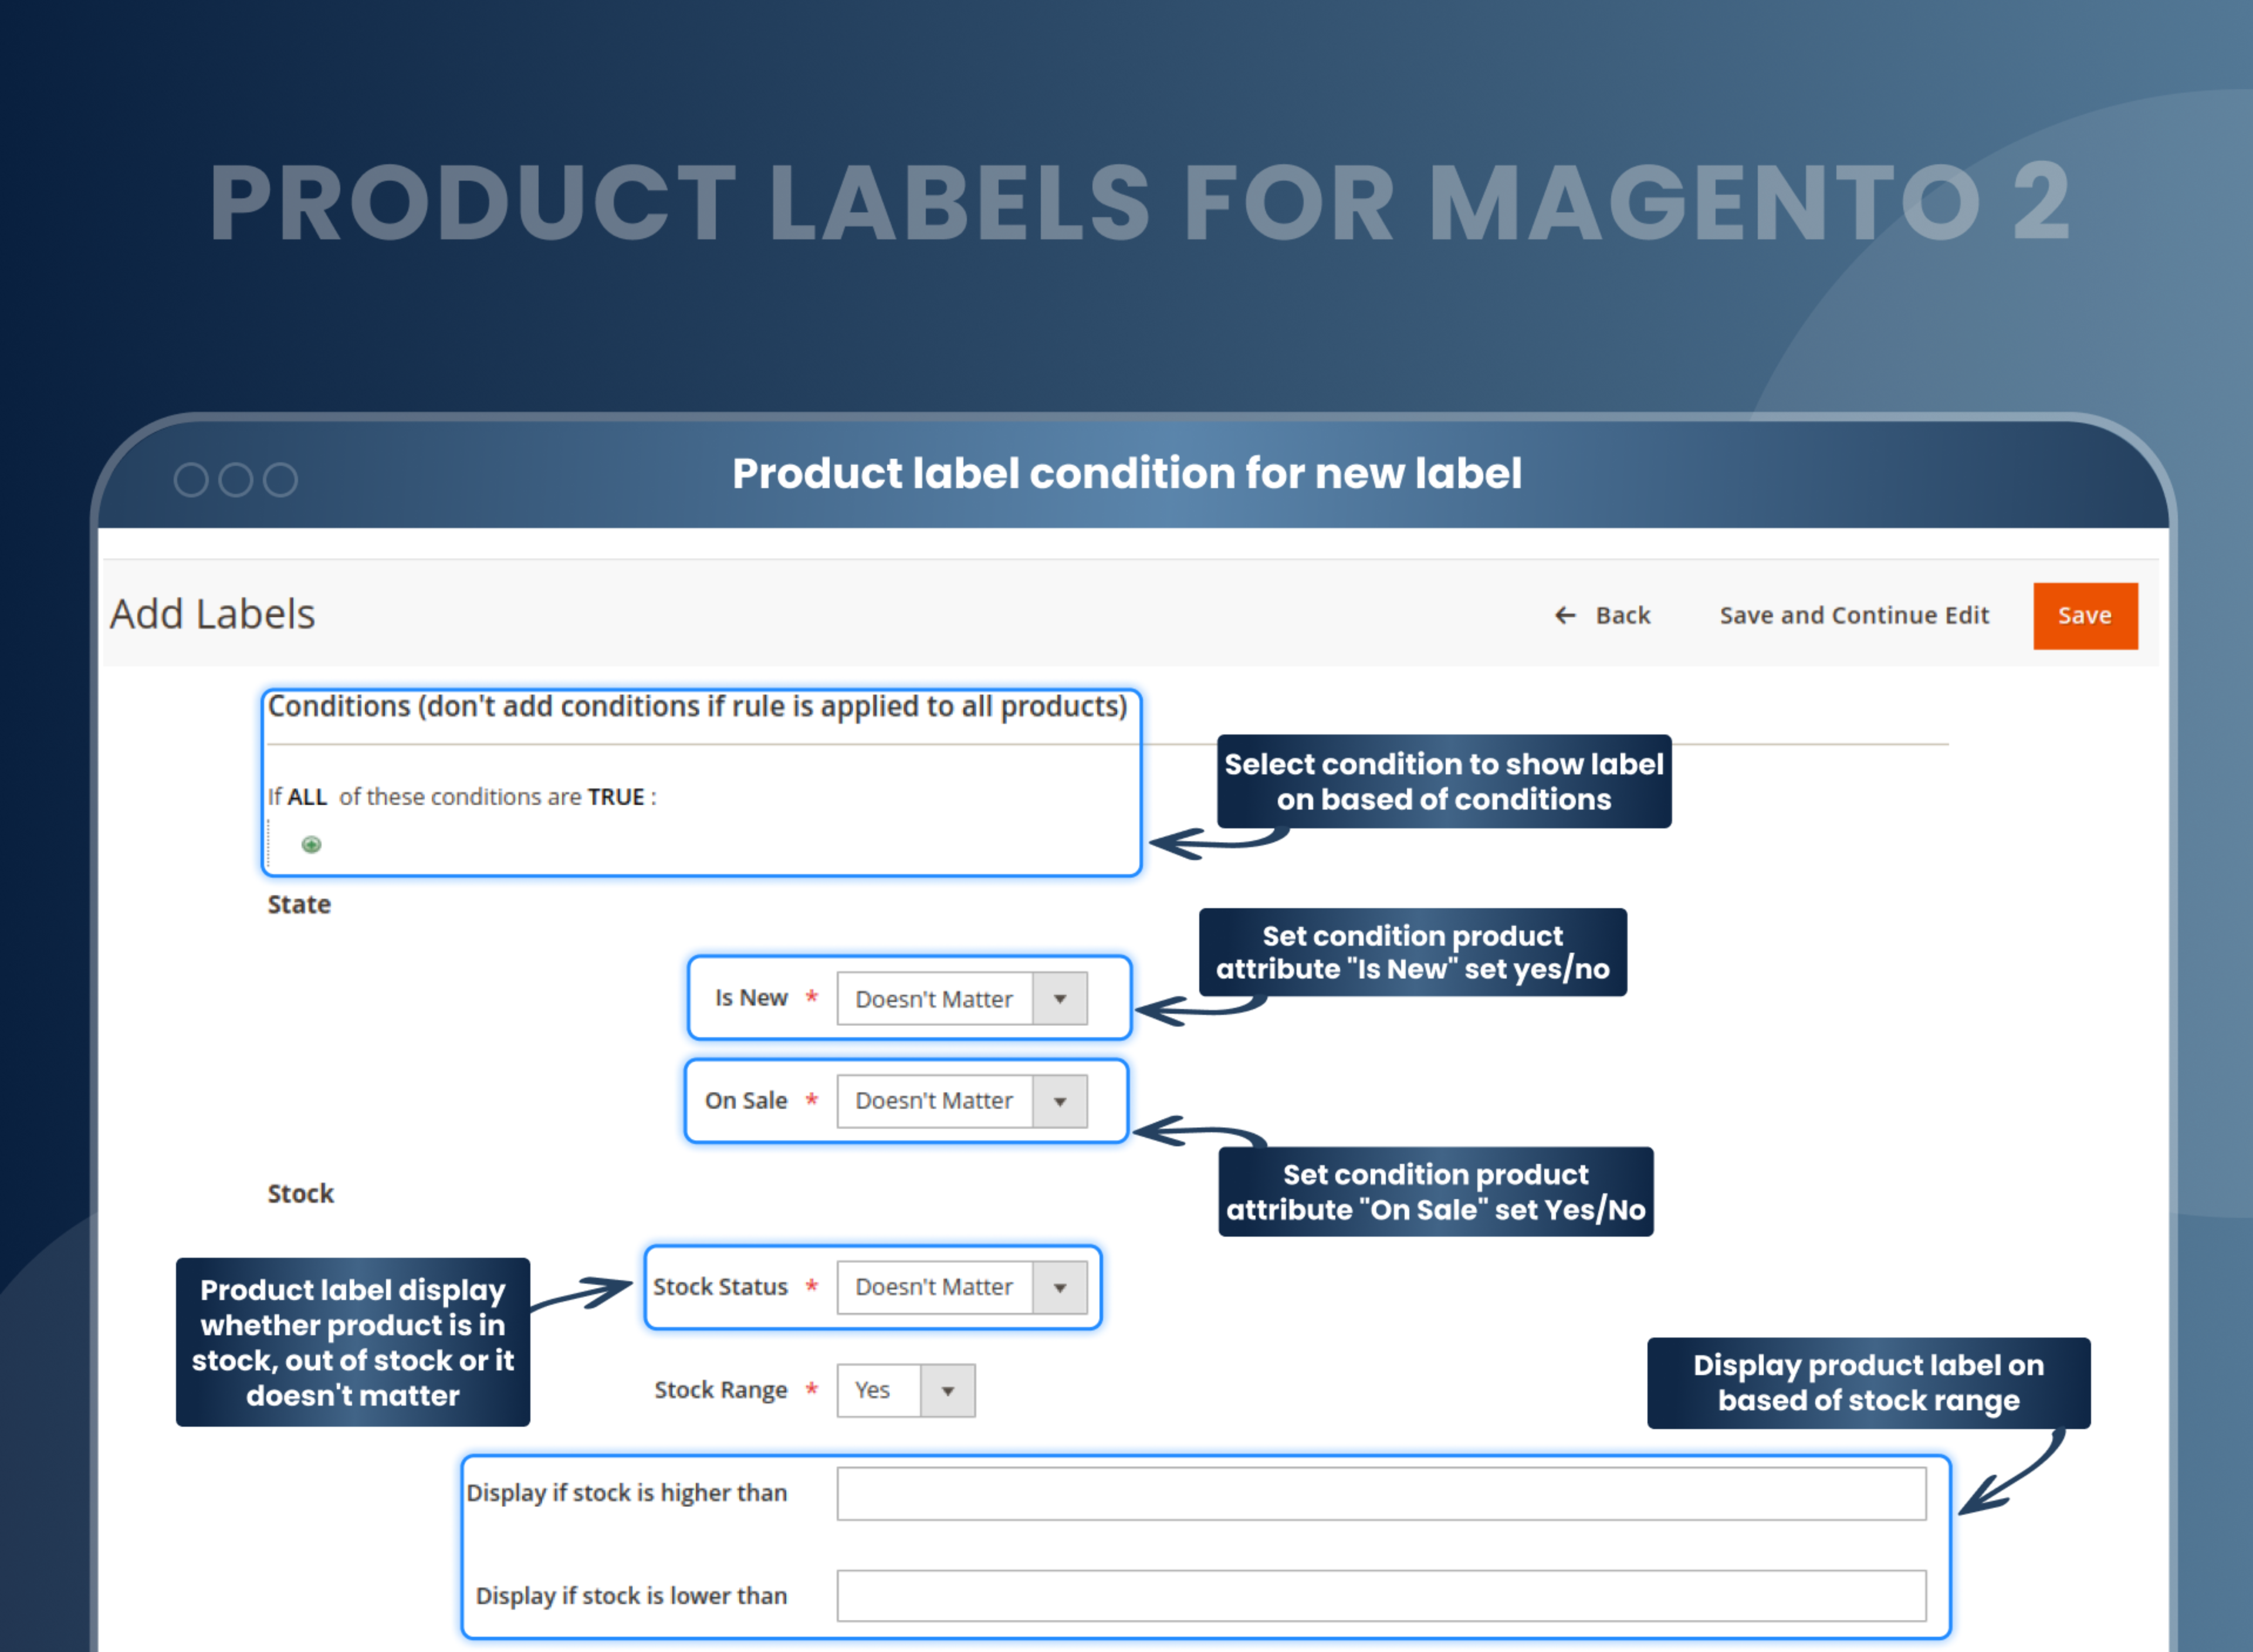 Product label condition for new label